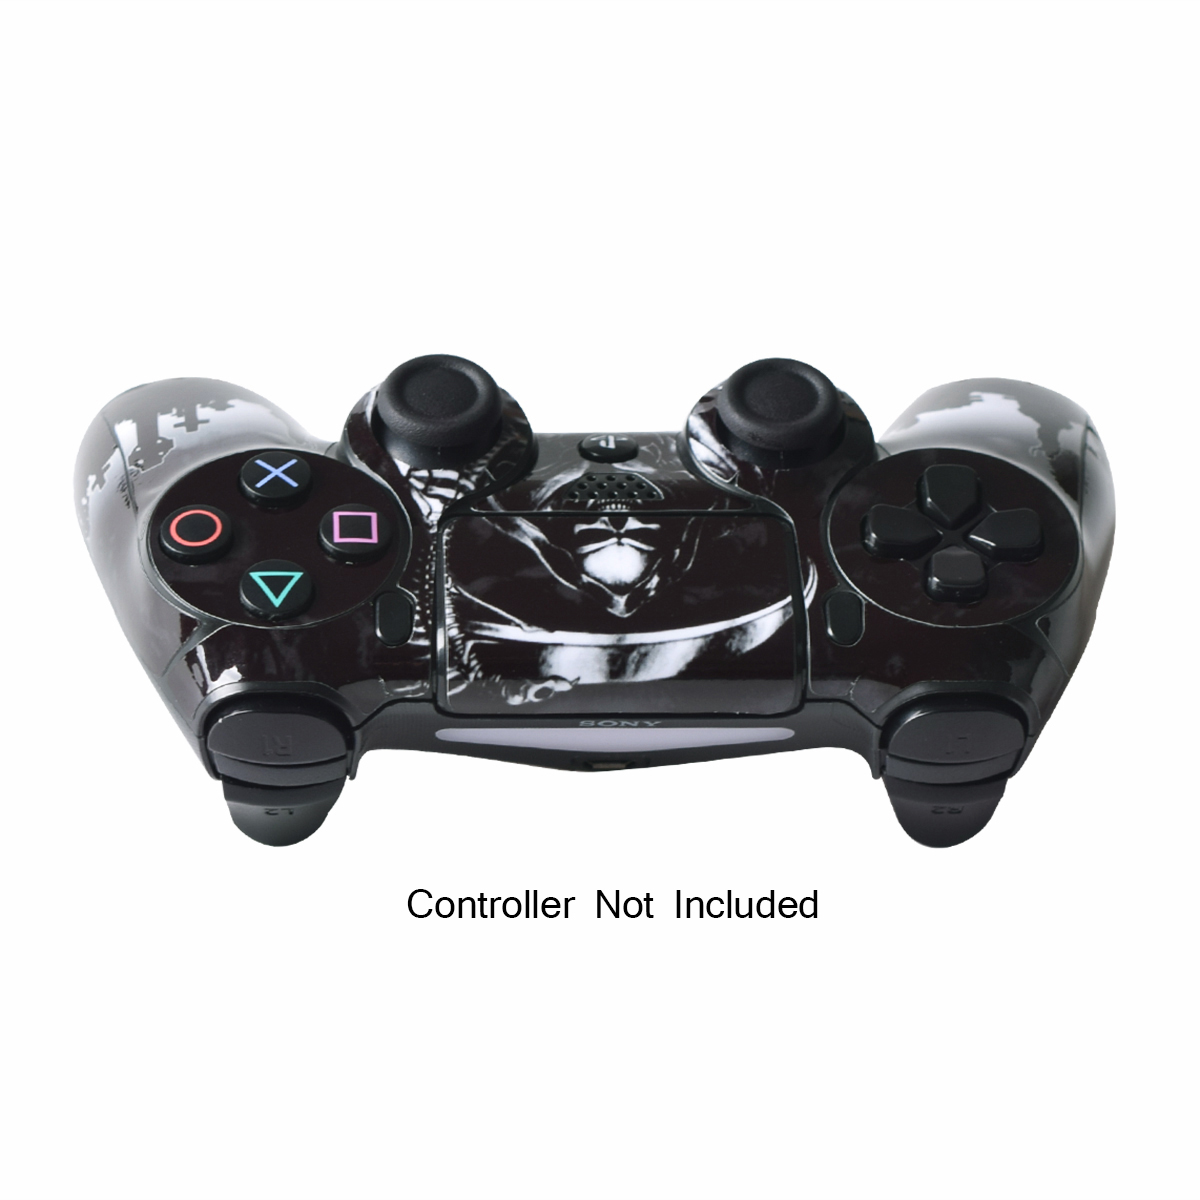 PS4 Controller Skins Stickers PS4 Remote Skin Playstation 4 Dualshock 4 Vinyl Decal Reaper Black - image 4 of 4